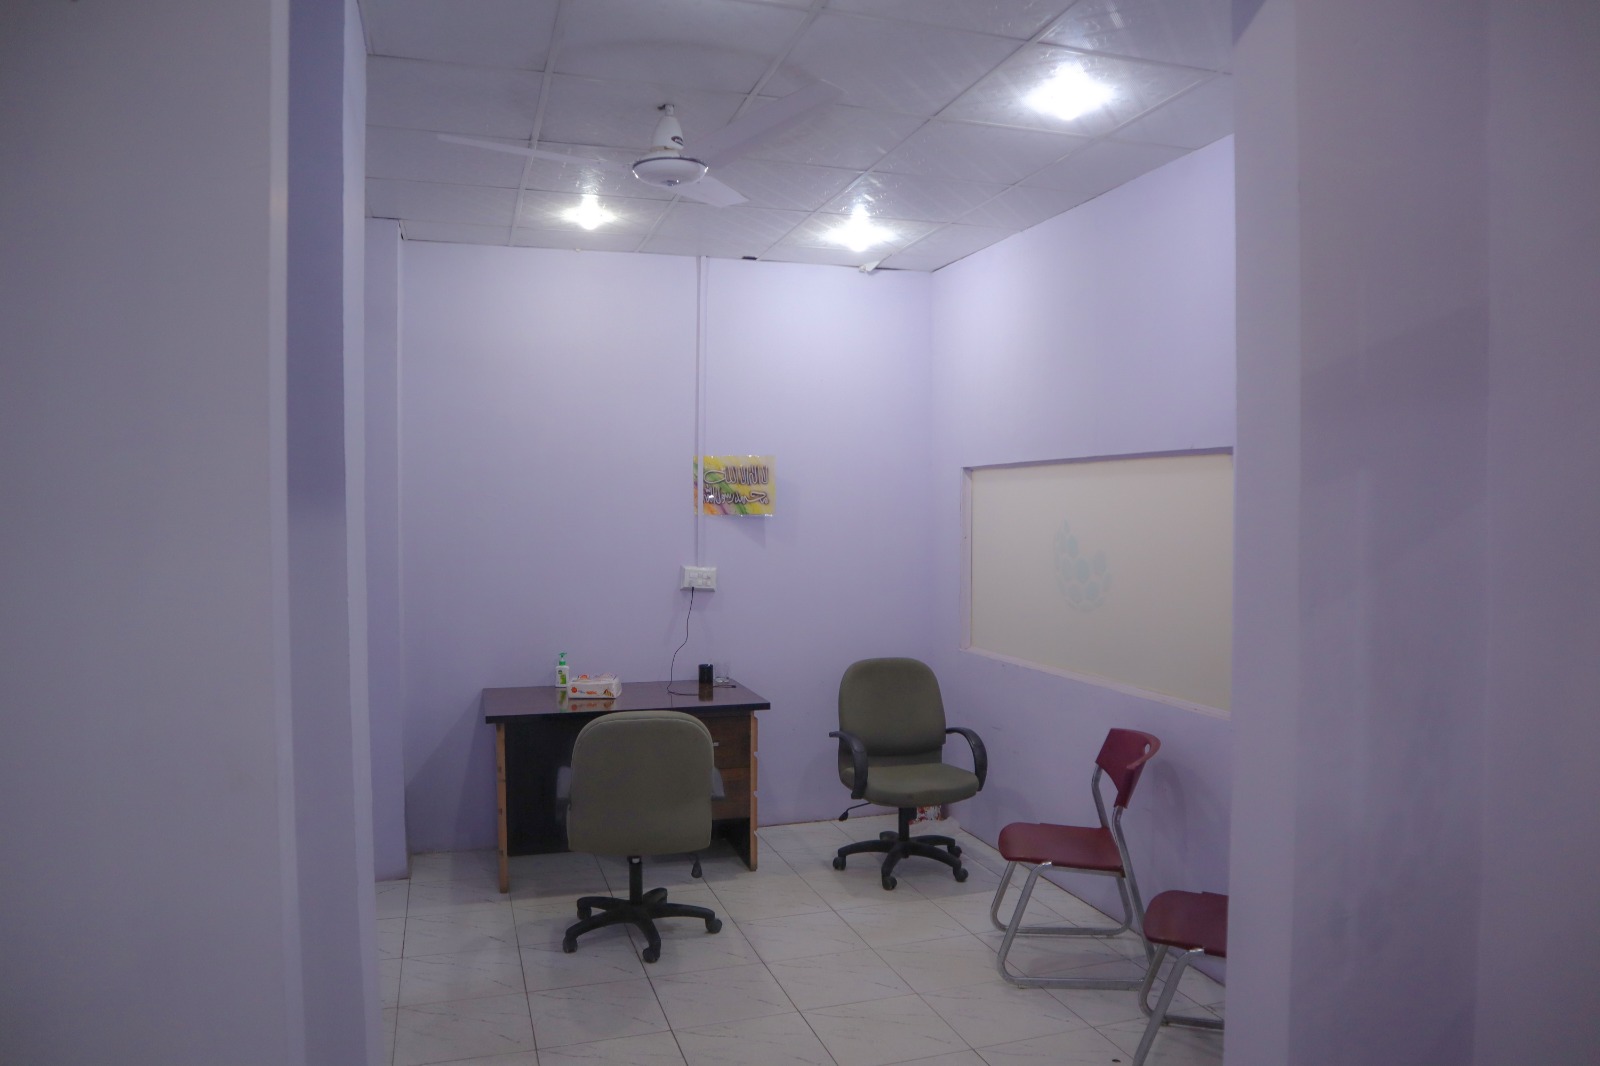 1200 Sq.ft Office For Rent in Faisalabad at Jaranwala Road.